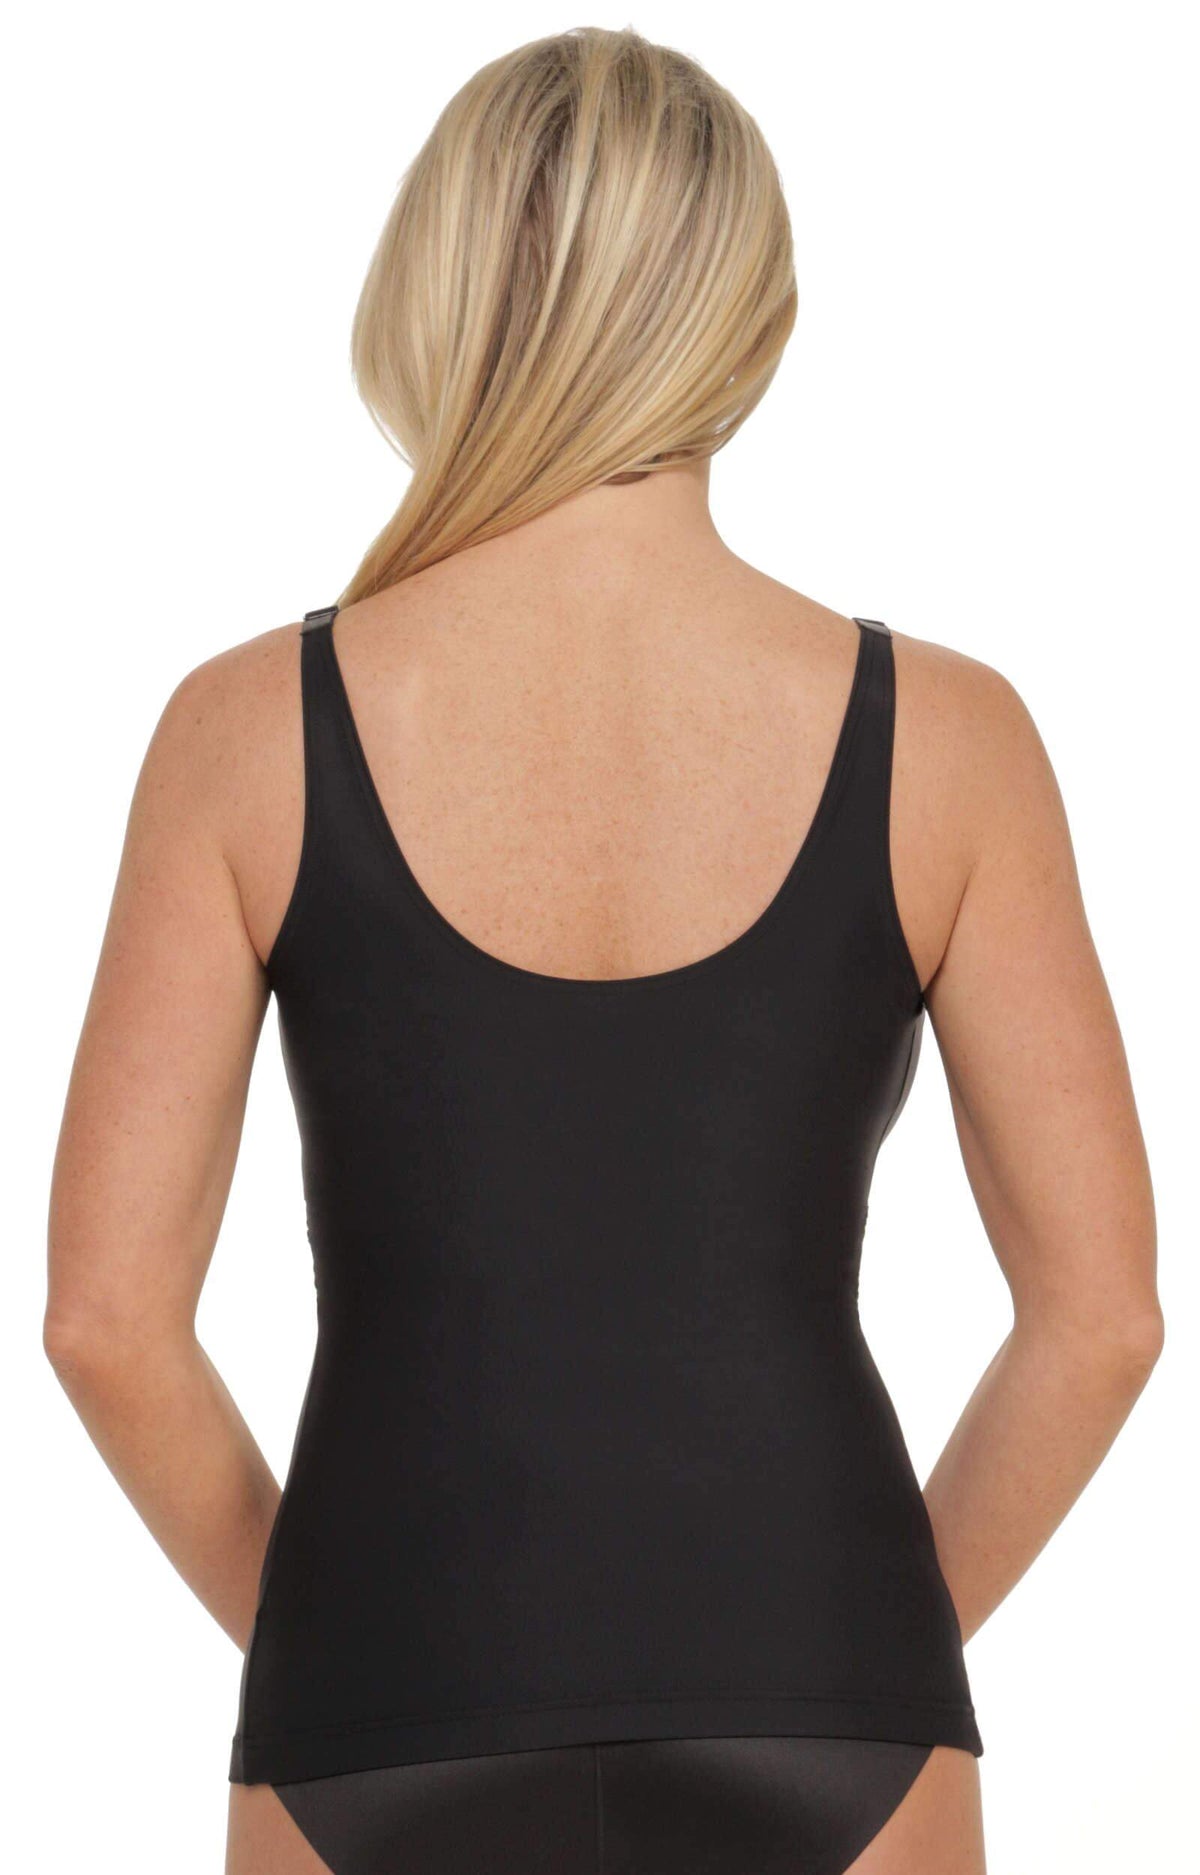 Get our Longline Cami-Style Back-Smoothing Bra w/ Tummy Control